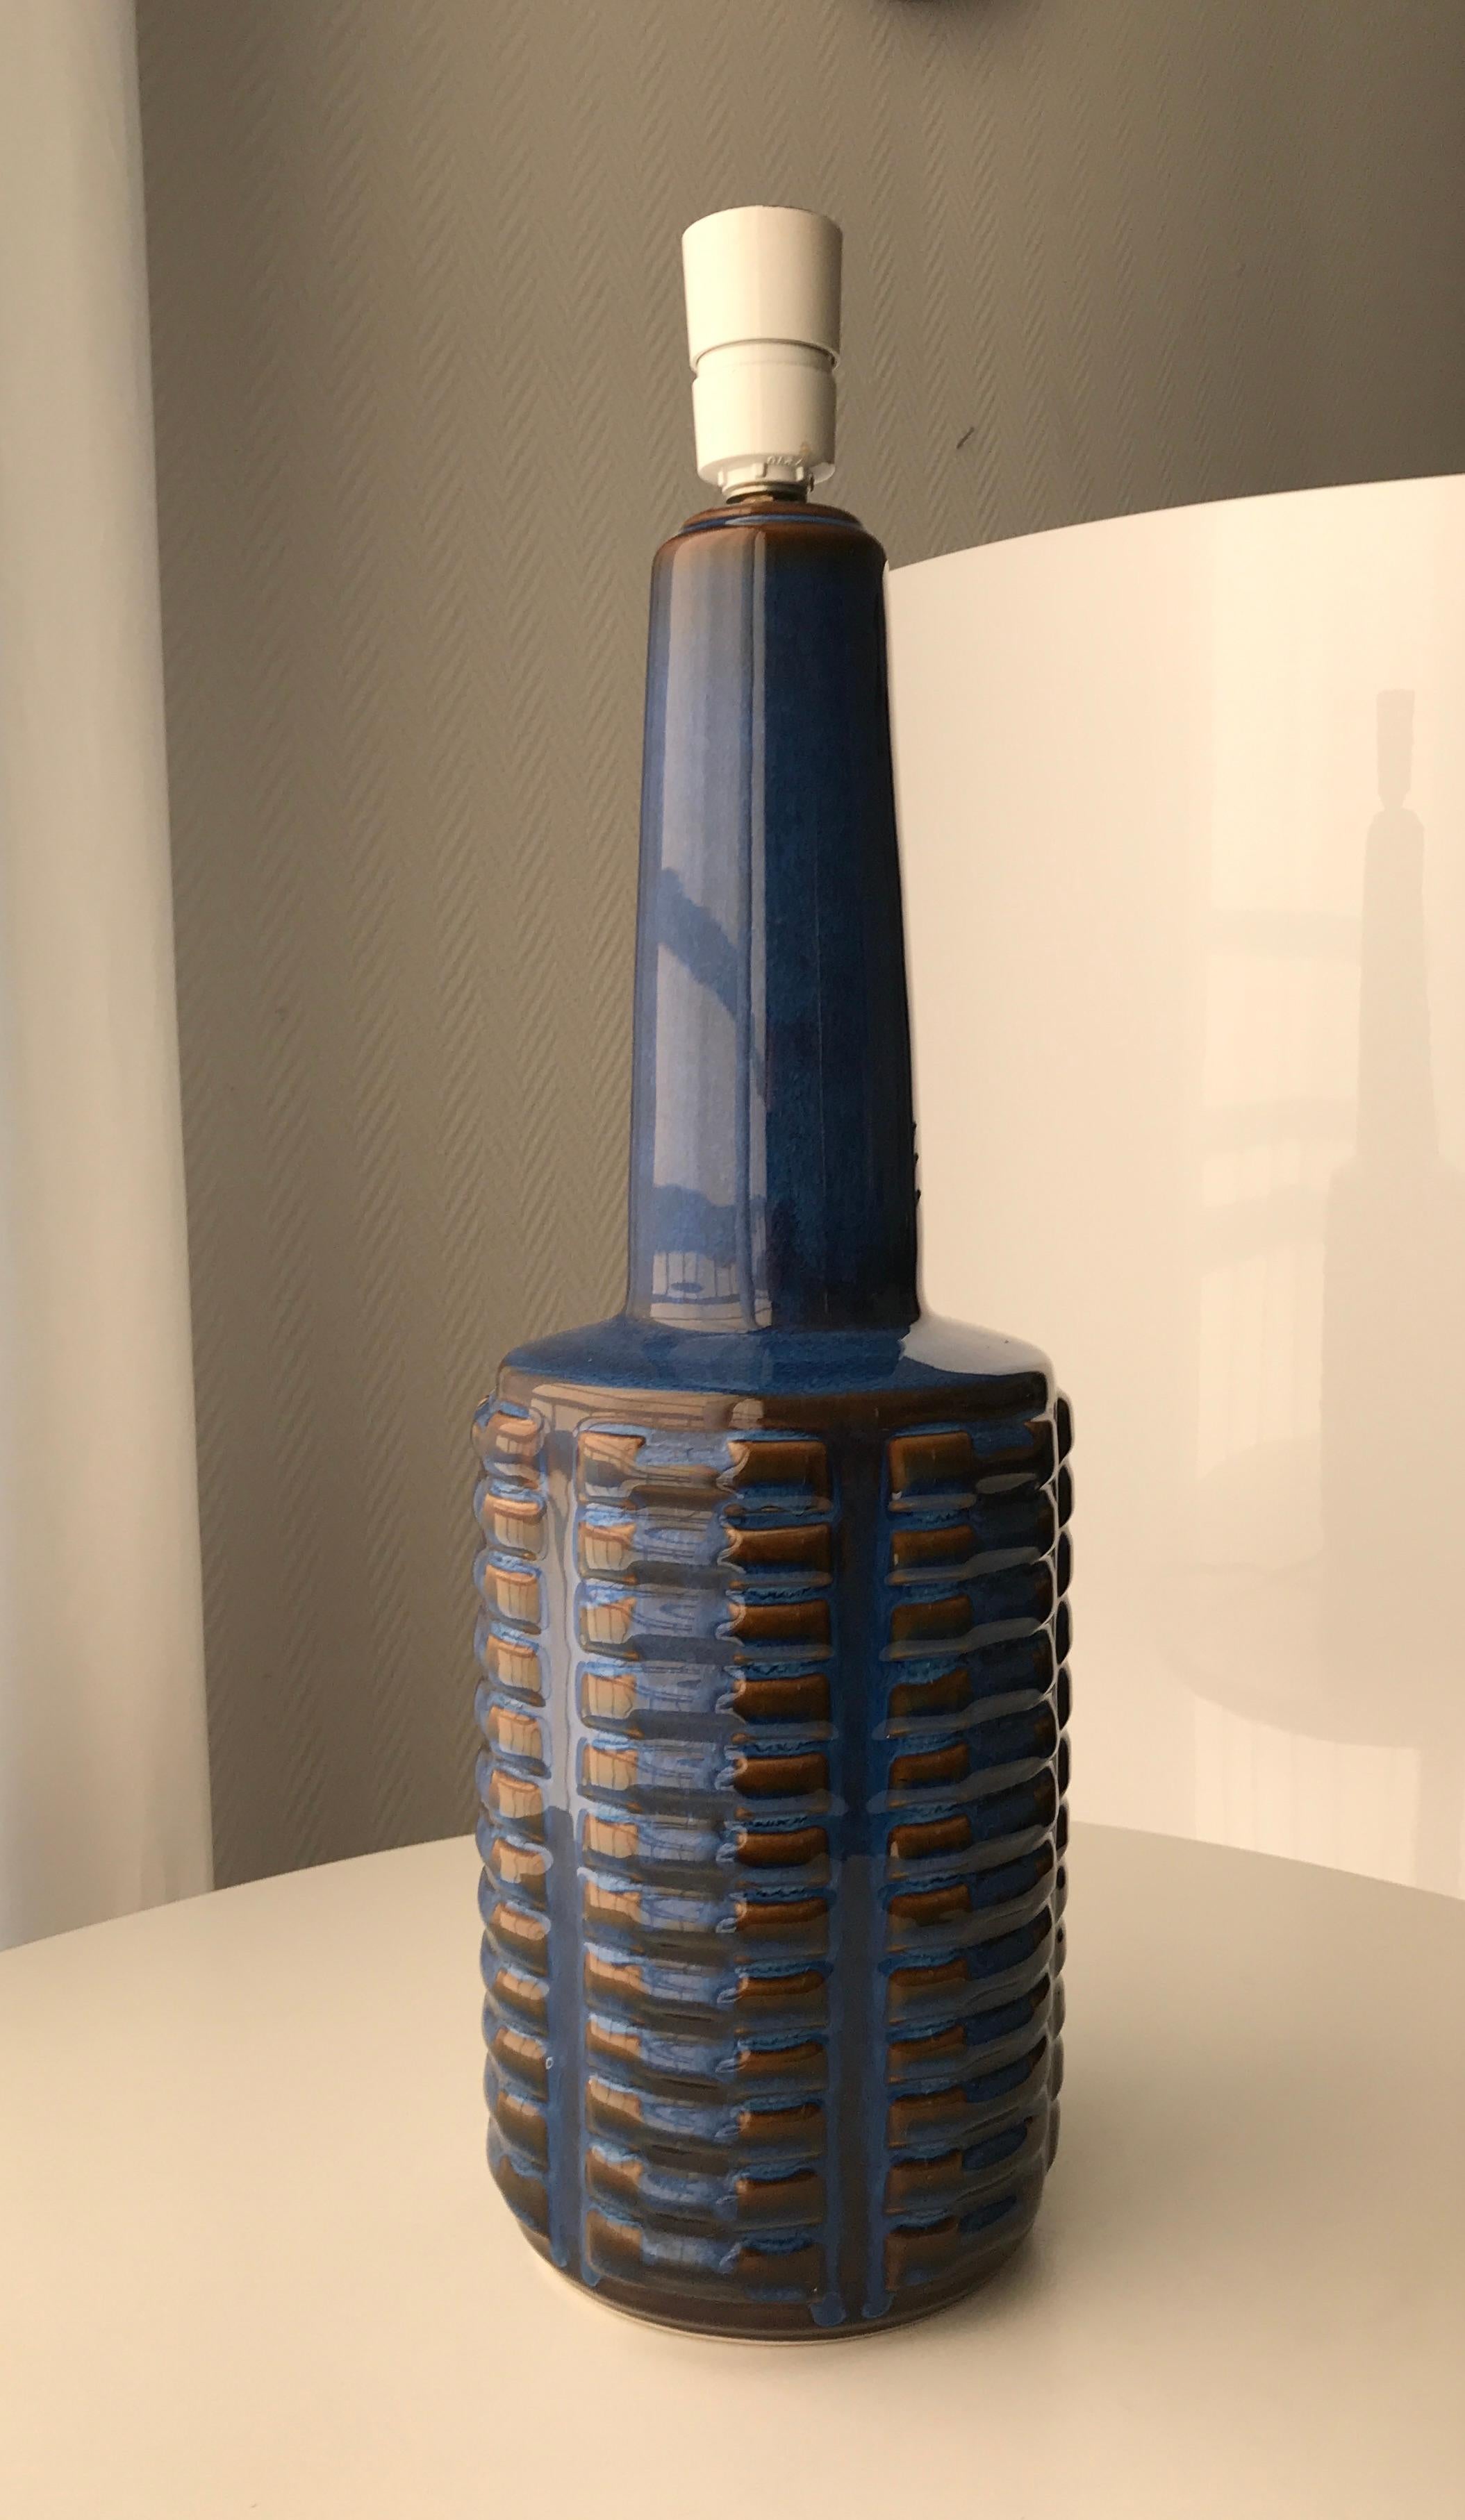 Rare vintage Danish midcentury Scandinavian Modern big table lamp from Søholm from the Blue Series 1964 made in blue and black glazed stoneware. Please note that this is the bigger model and can even be used as a floor lamp. Typically for sale is